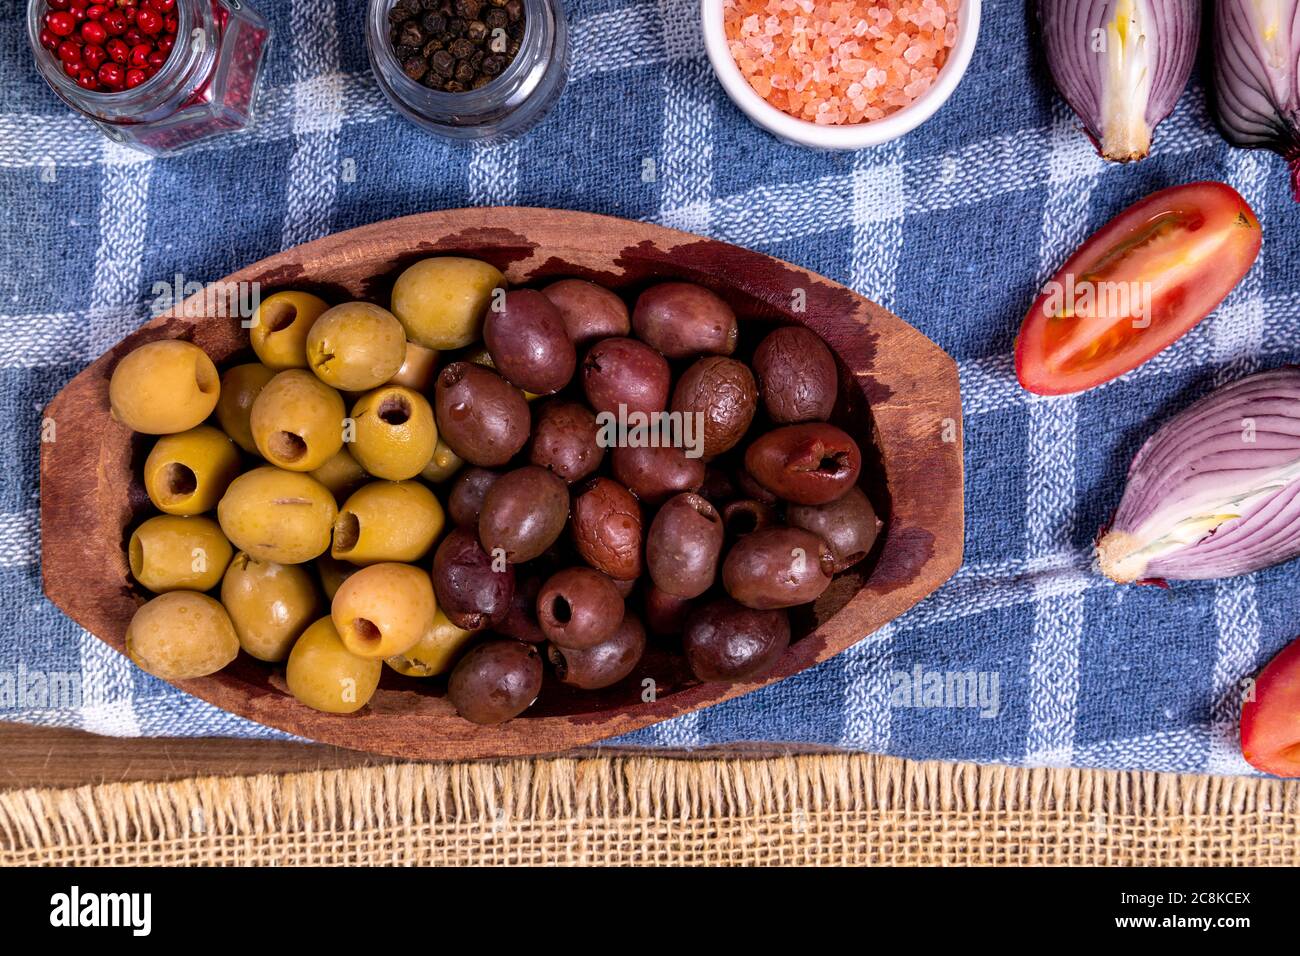 Portion of black, green olives, bowl with pink himalayan salt and glass jars with grains of red and black pepper. Stock Photo